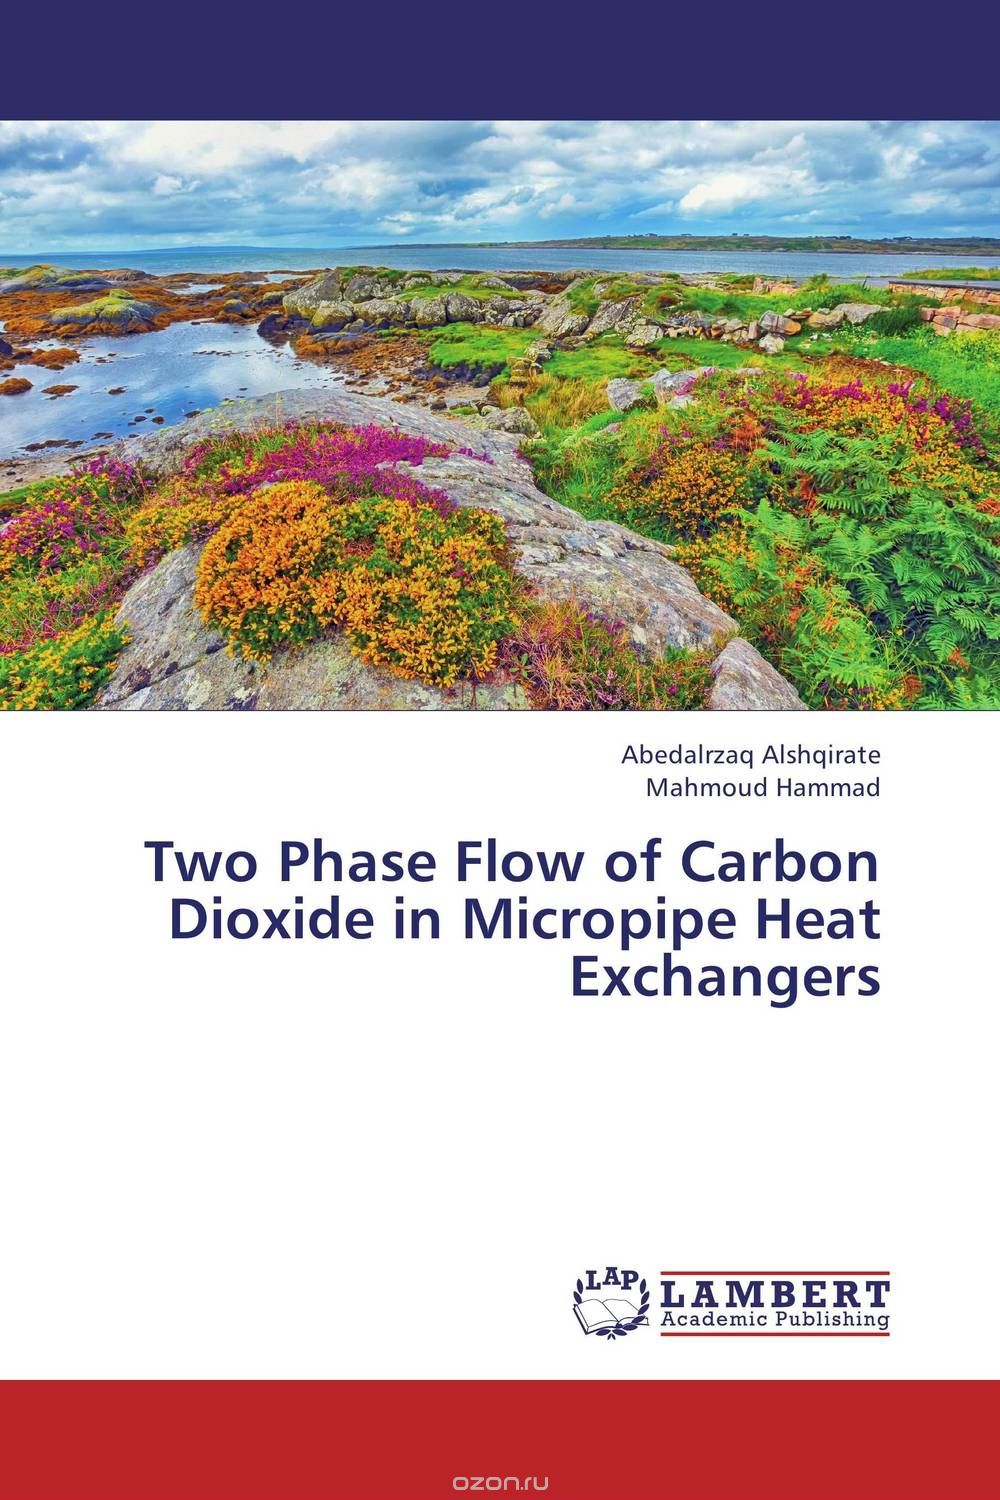 Скачать книгу "Two Phase Flow of Carbon Dioxide in Micropipe Heat Exchangers"